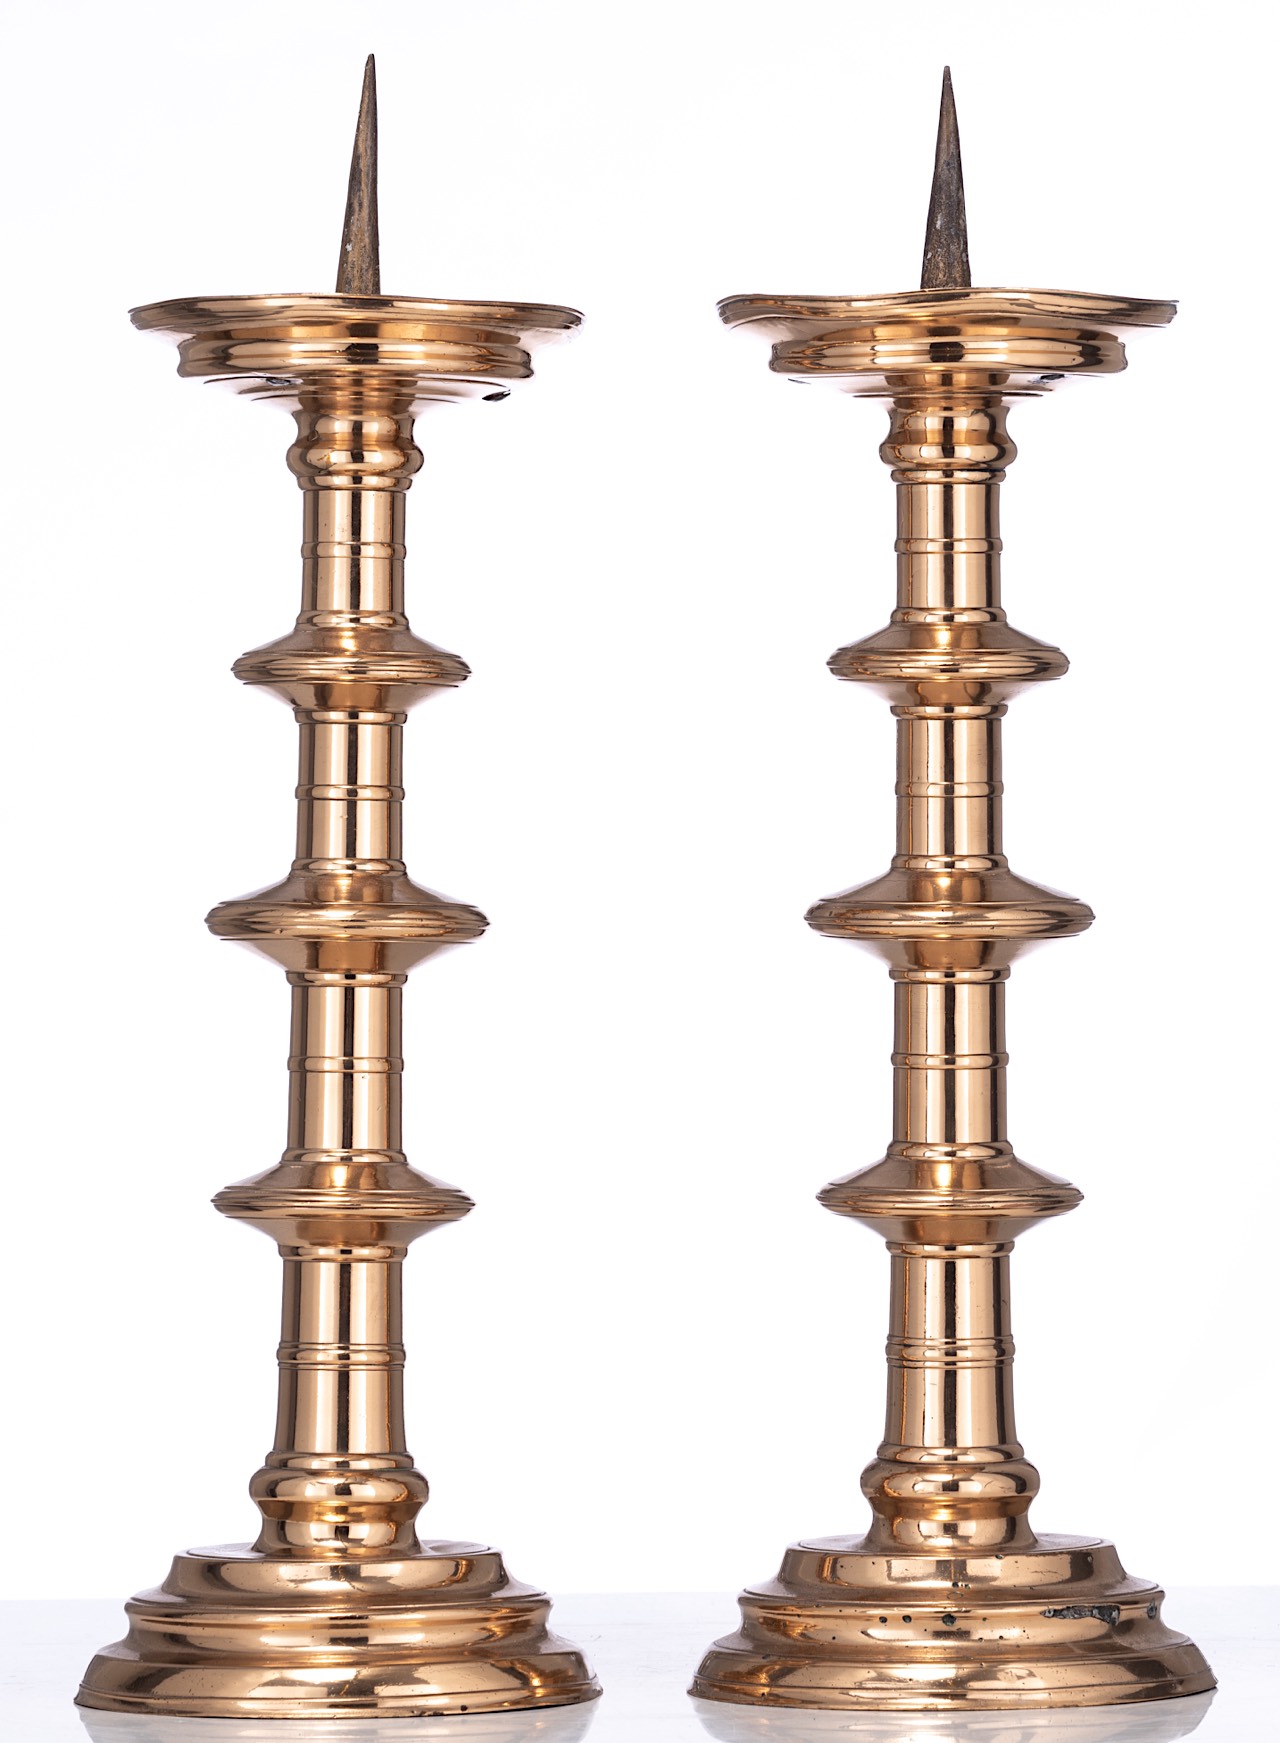 A pair of pricket candlesticks, 16thC, H 55 - 56 cm - Image 5 of 16